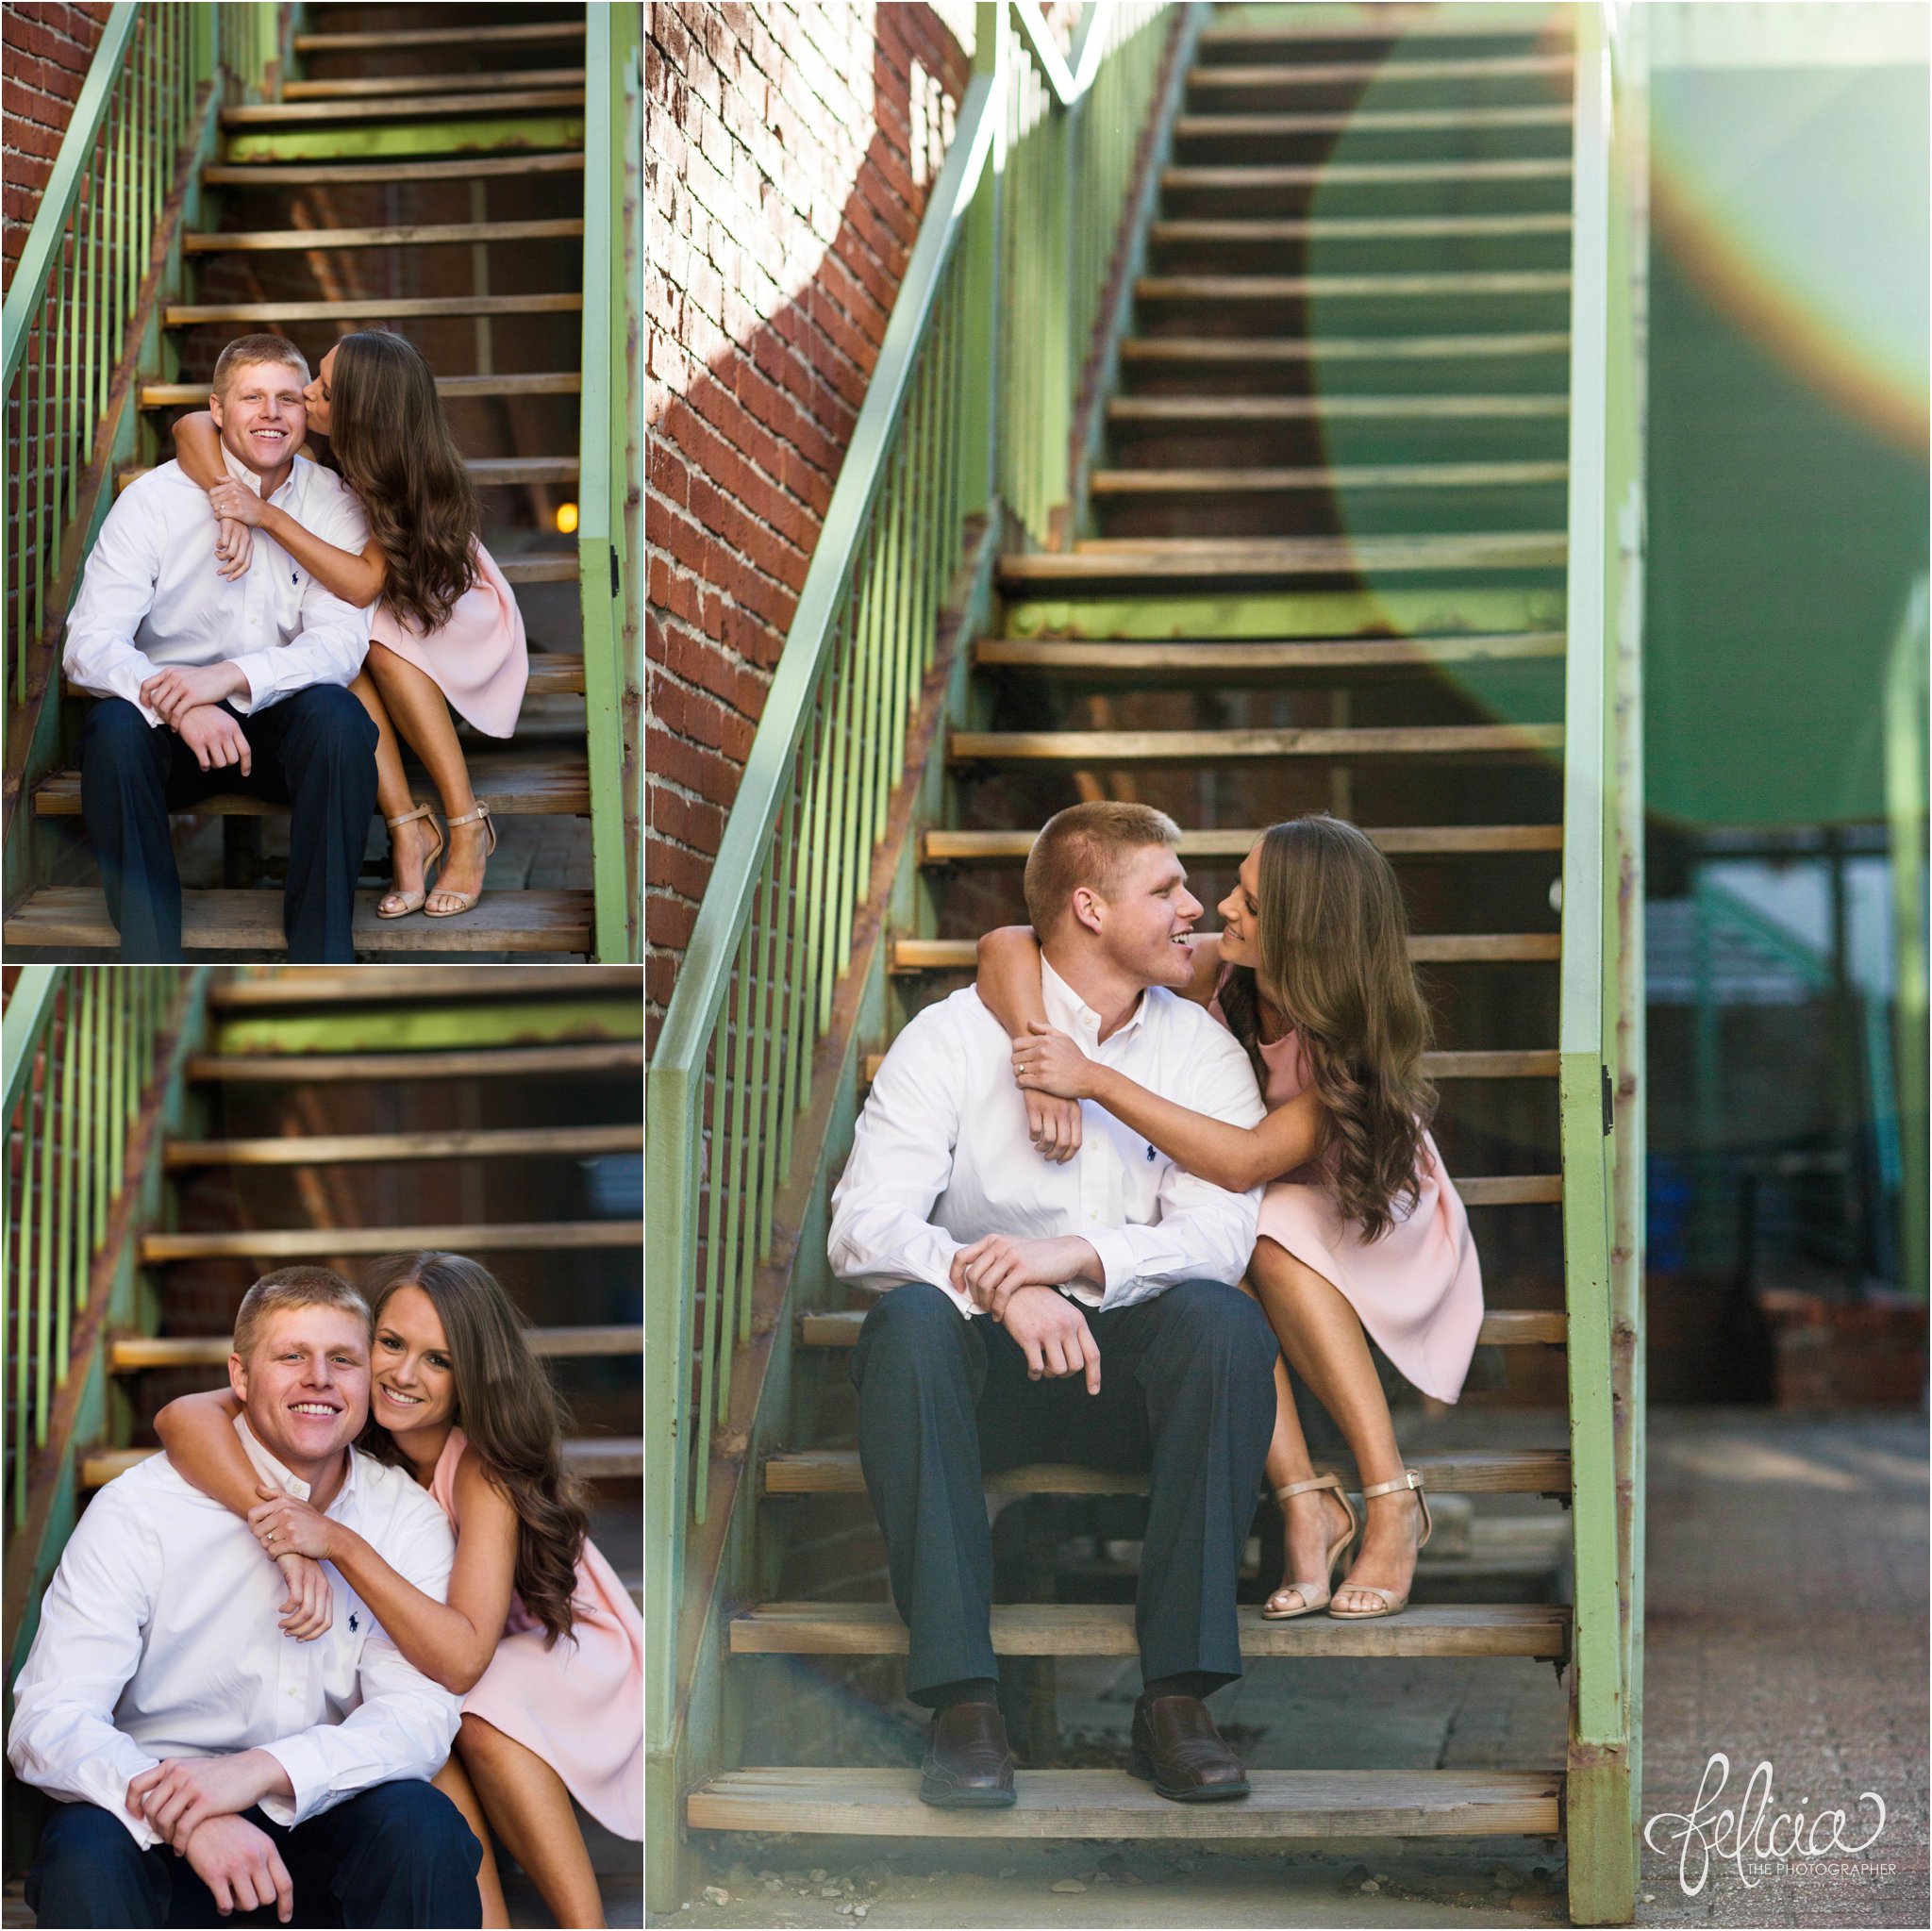 KC Romantic Engagement Photos | Green Urban Stairwell | Images by www.feliciathephotographer.com